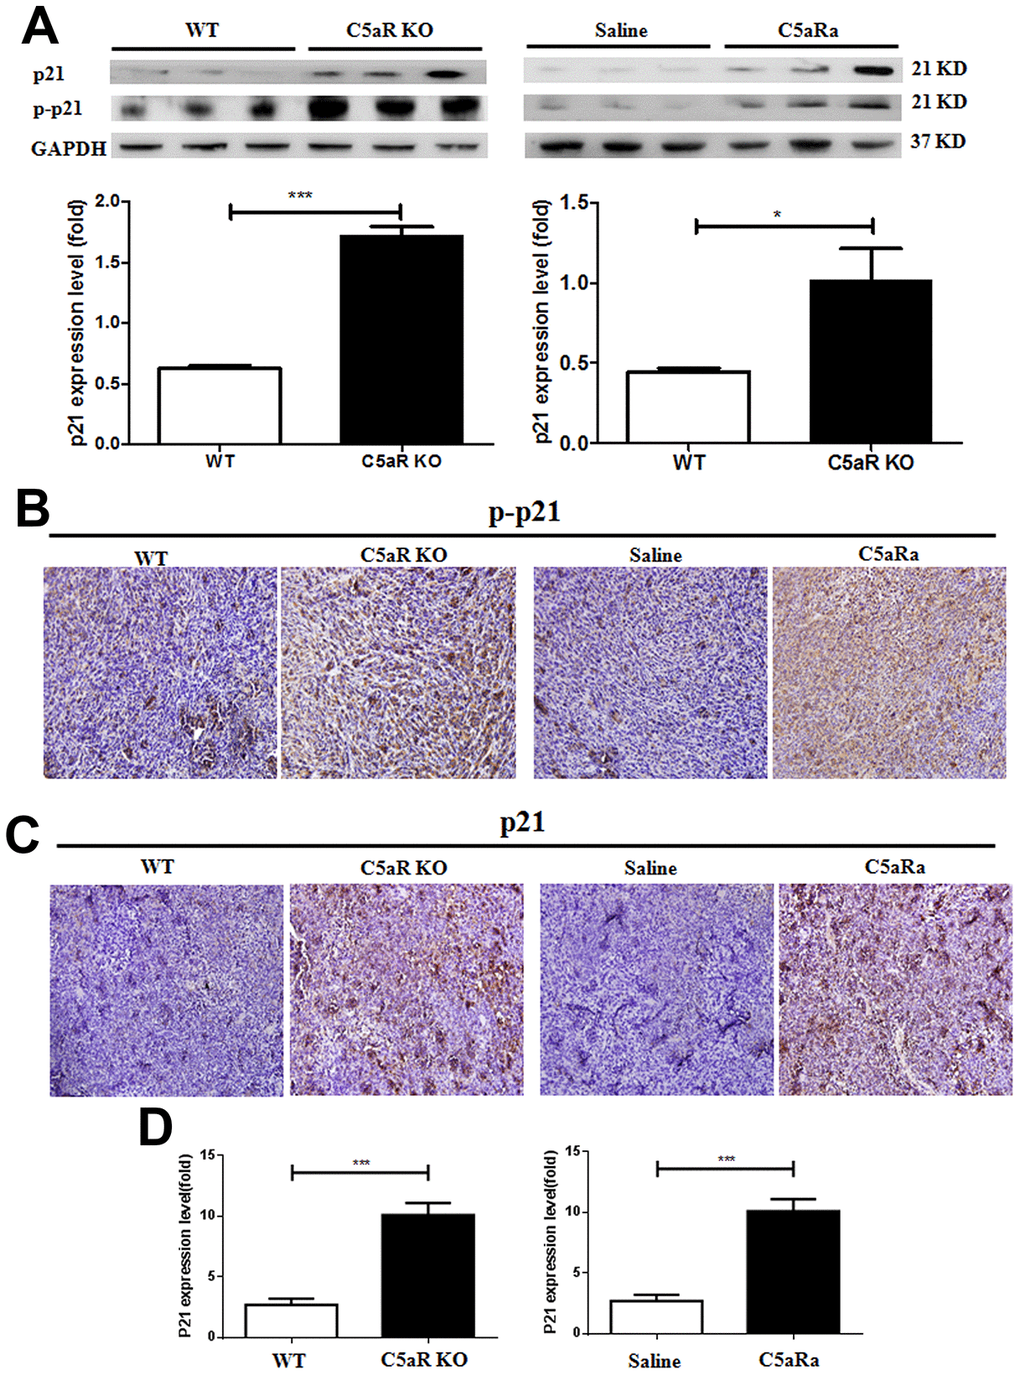 C5aR deficiency or C5aR signaling blockade inhibits the downregualtion of p21 expression in tumor tissues of mice. Mice were received 4T-1 cells transplantation for tumor development and sacrificed in the indicated time. (C5aRa treatment group: WT mice were injected with C5aRa 30 min prior to 4T-1 cells transplantation. Saline was used as the control of C5aRa). The tumors tissues were collected. The expression of p21 and p-p21 was measured by western blotting (A) and immunohistochemistry (B, C). (D) The mRNA levels of p21 were measured by quantitative RT-PCR. (n=5-6/group). *P 